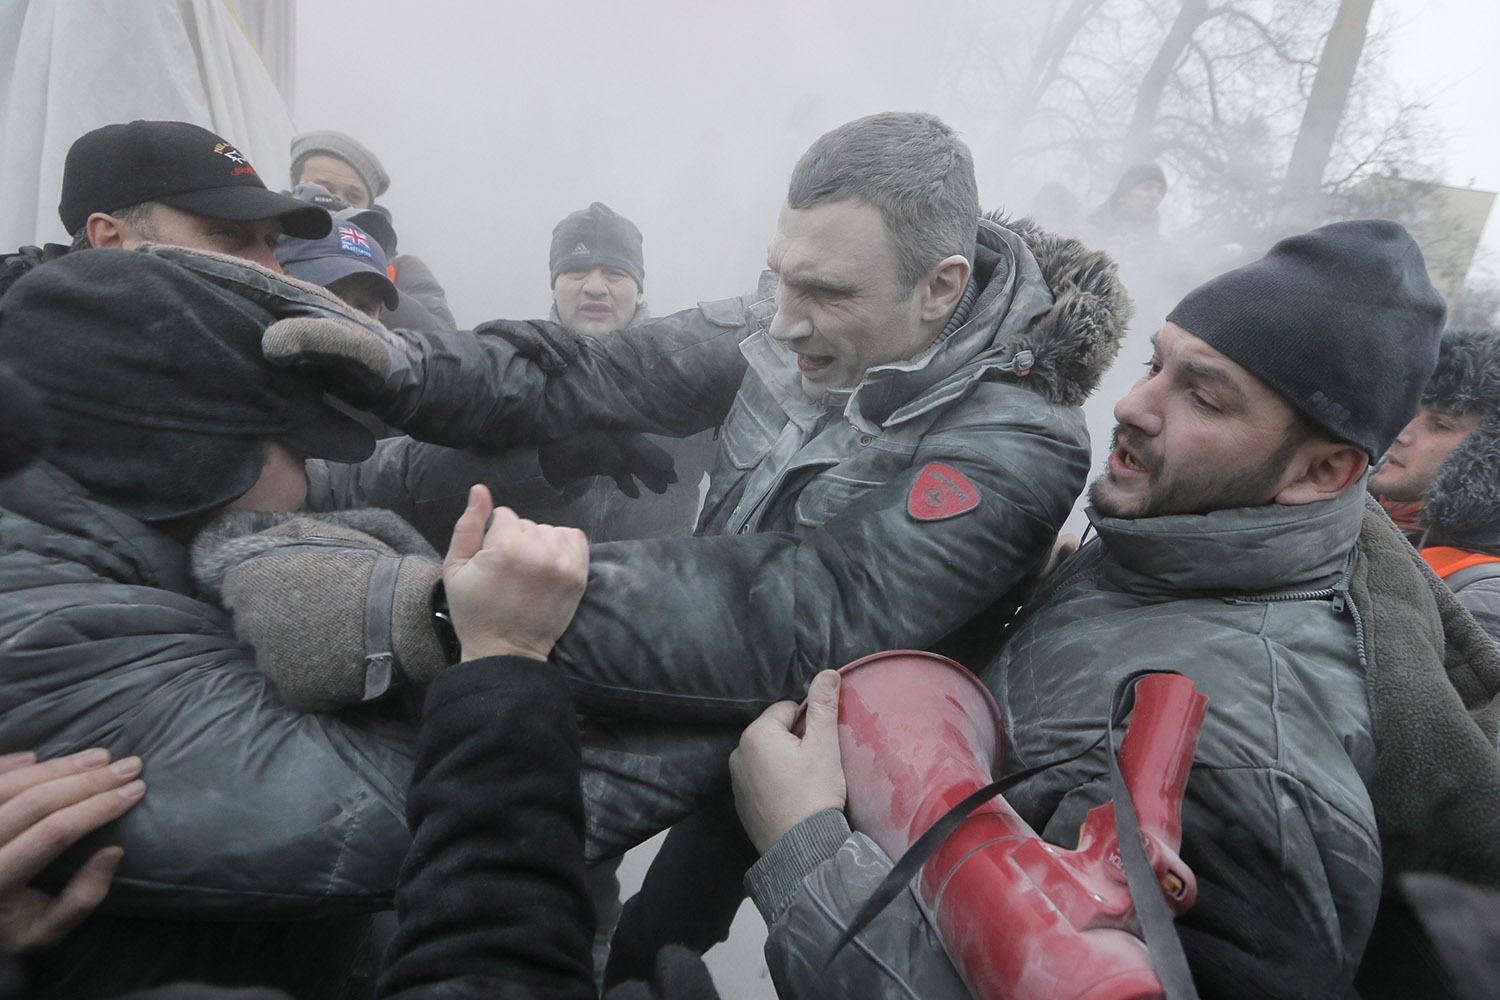 Jan. 19, 2014. Opposition leader and former WBC heavyweight boxing champion Vitali Klitschko, center, is attacked and sprayed with a fire extinguisher as he tries to stop the clashes between police and protesters  in central Kiev, Ukraine.